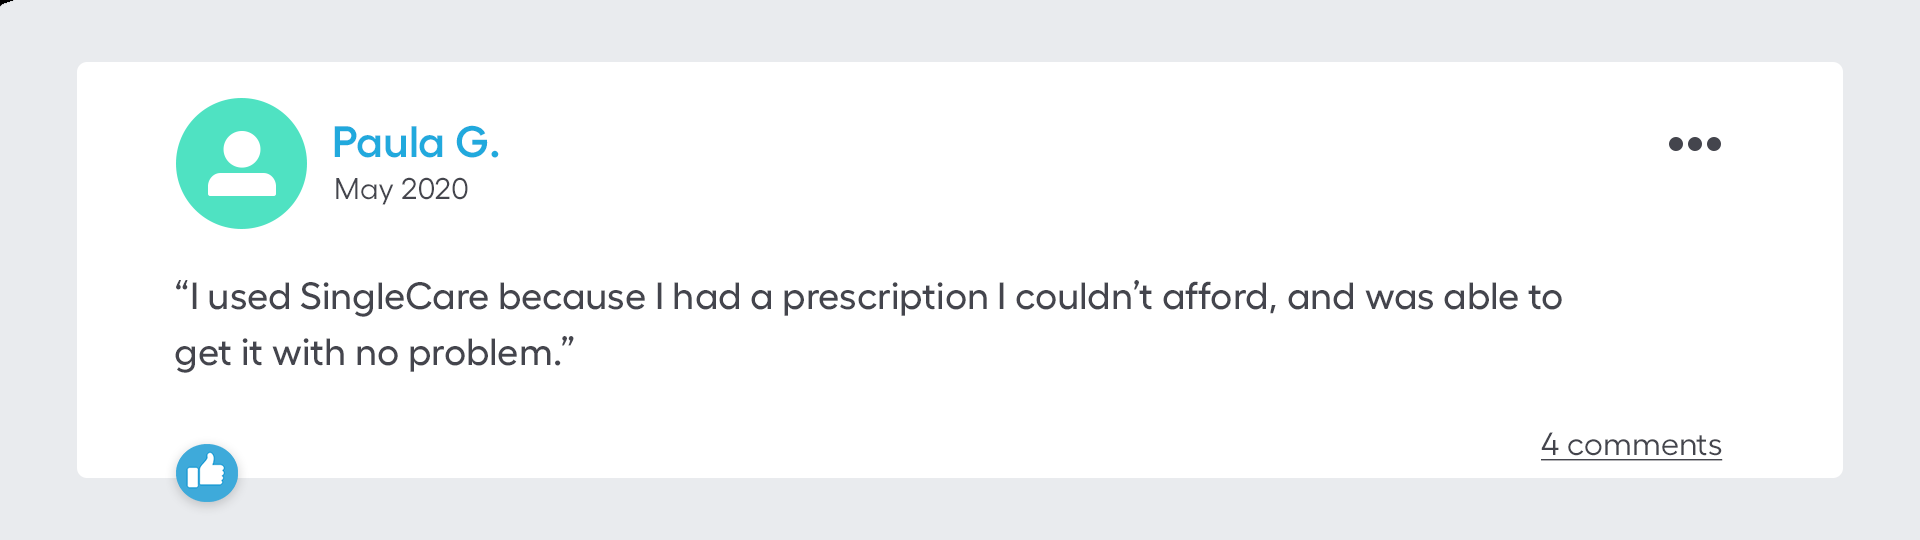 I used SingleCare because I had a prescription I couldn’t afford, and was able to get it with no problem.